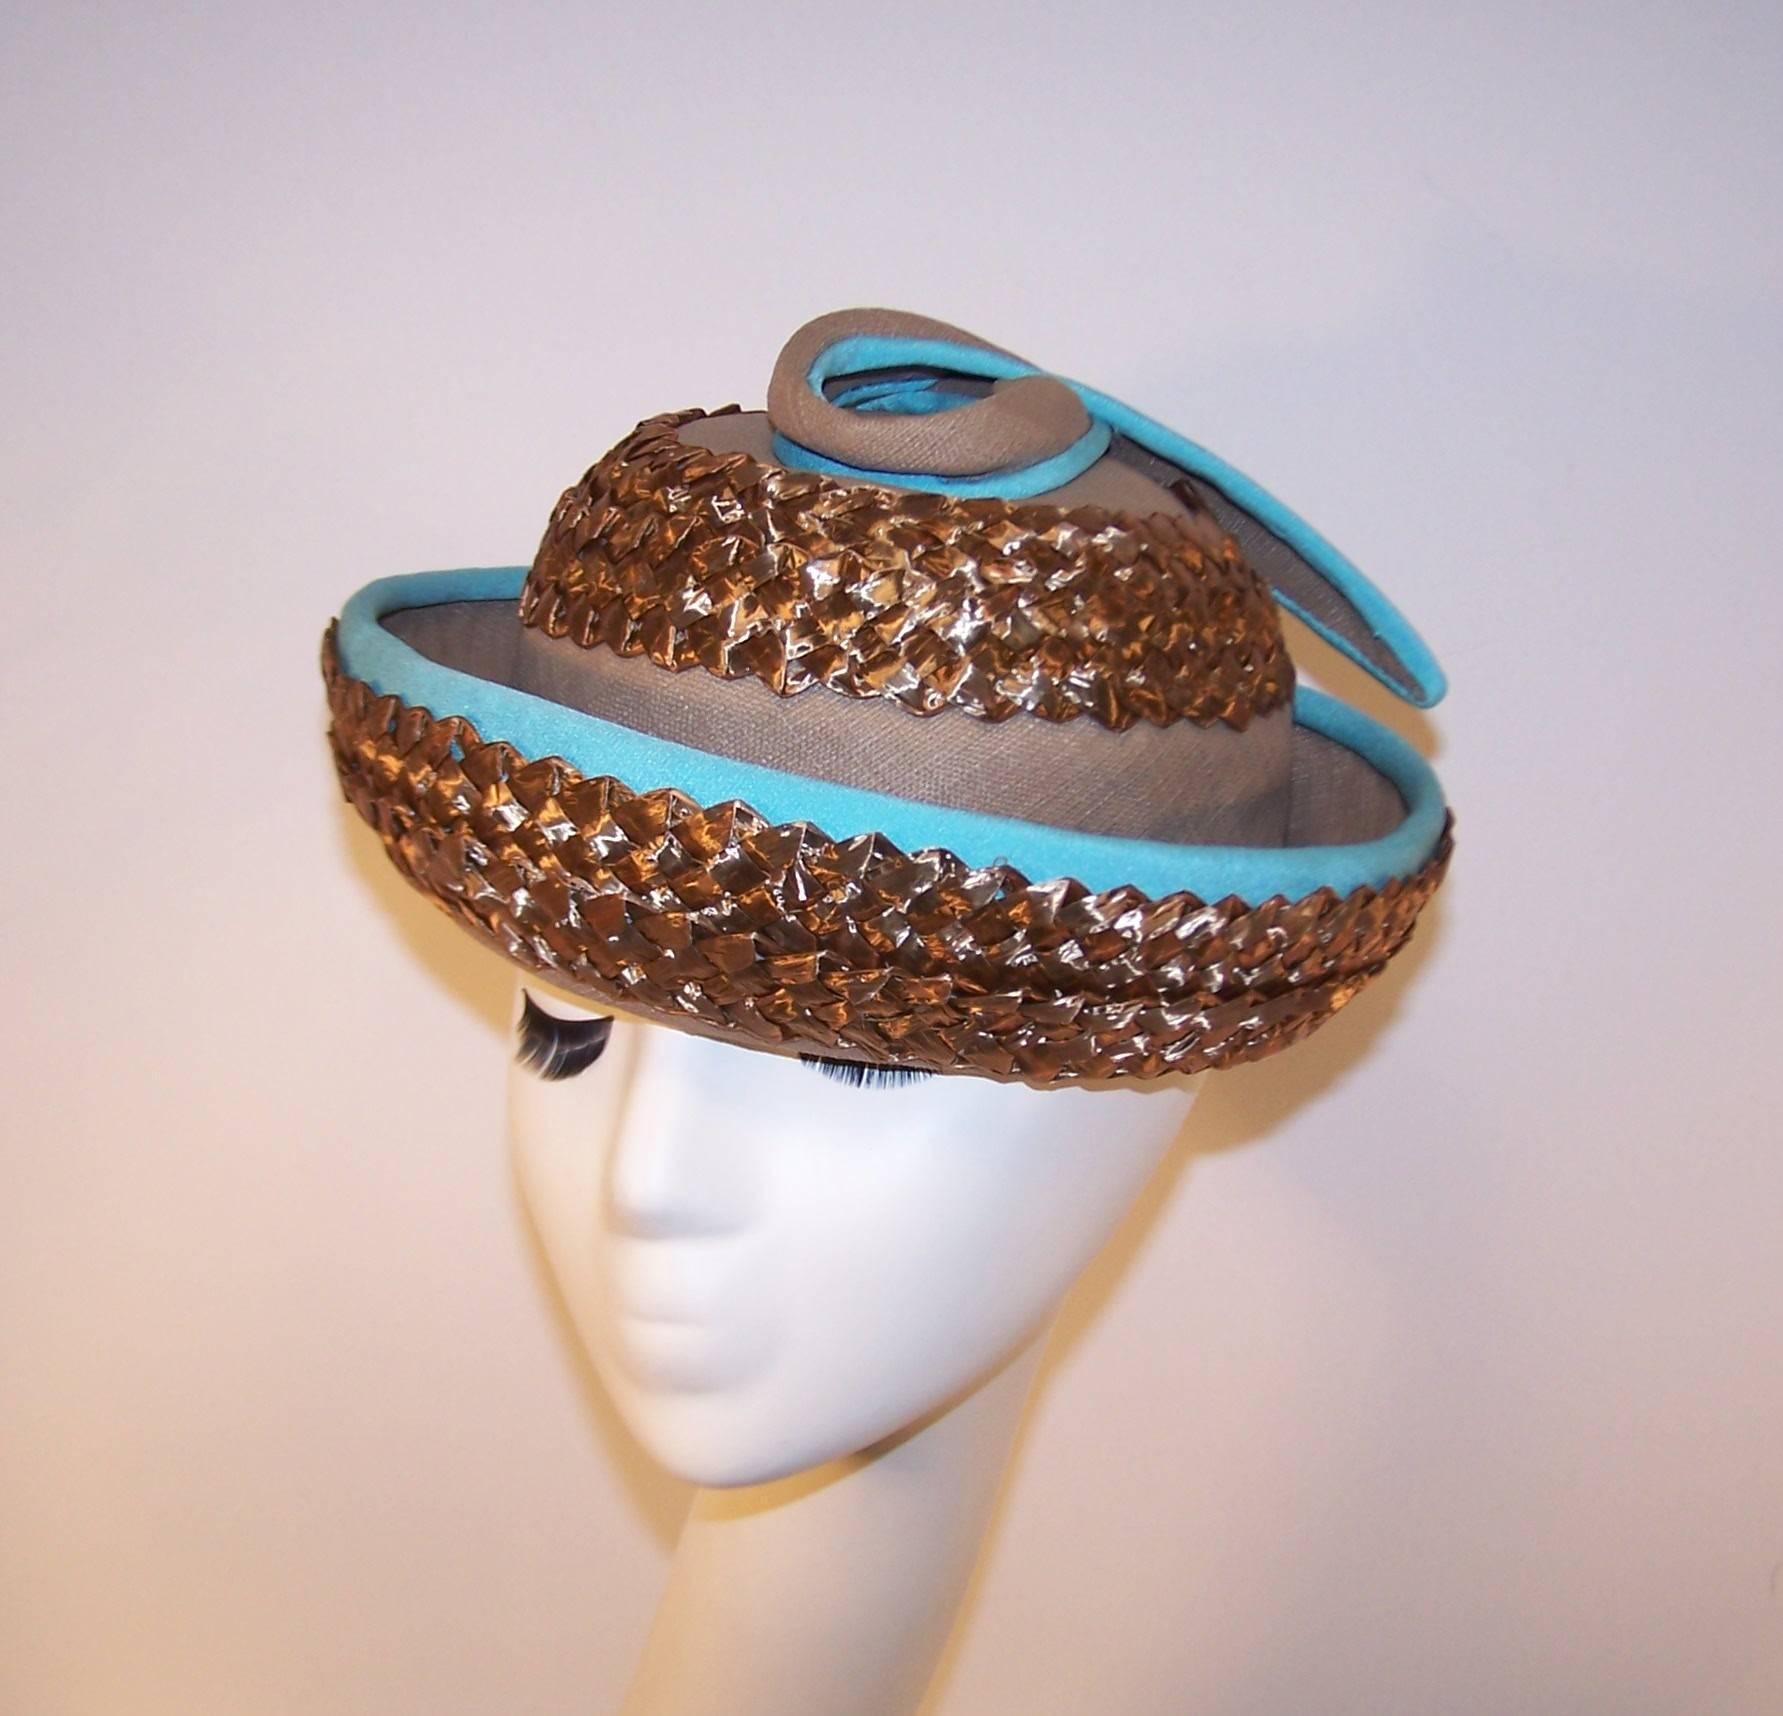 The color combination of this 1960's upturned boater hat by Bonta Creatrice is eye catching.  The natural light brown linen body is accented with a coordinating straw braid and set off with turquoise silk banding at the brim and on the decorative